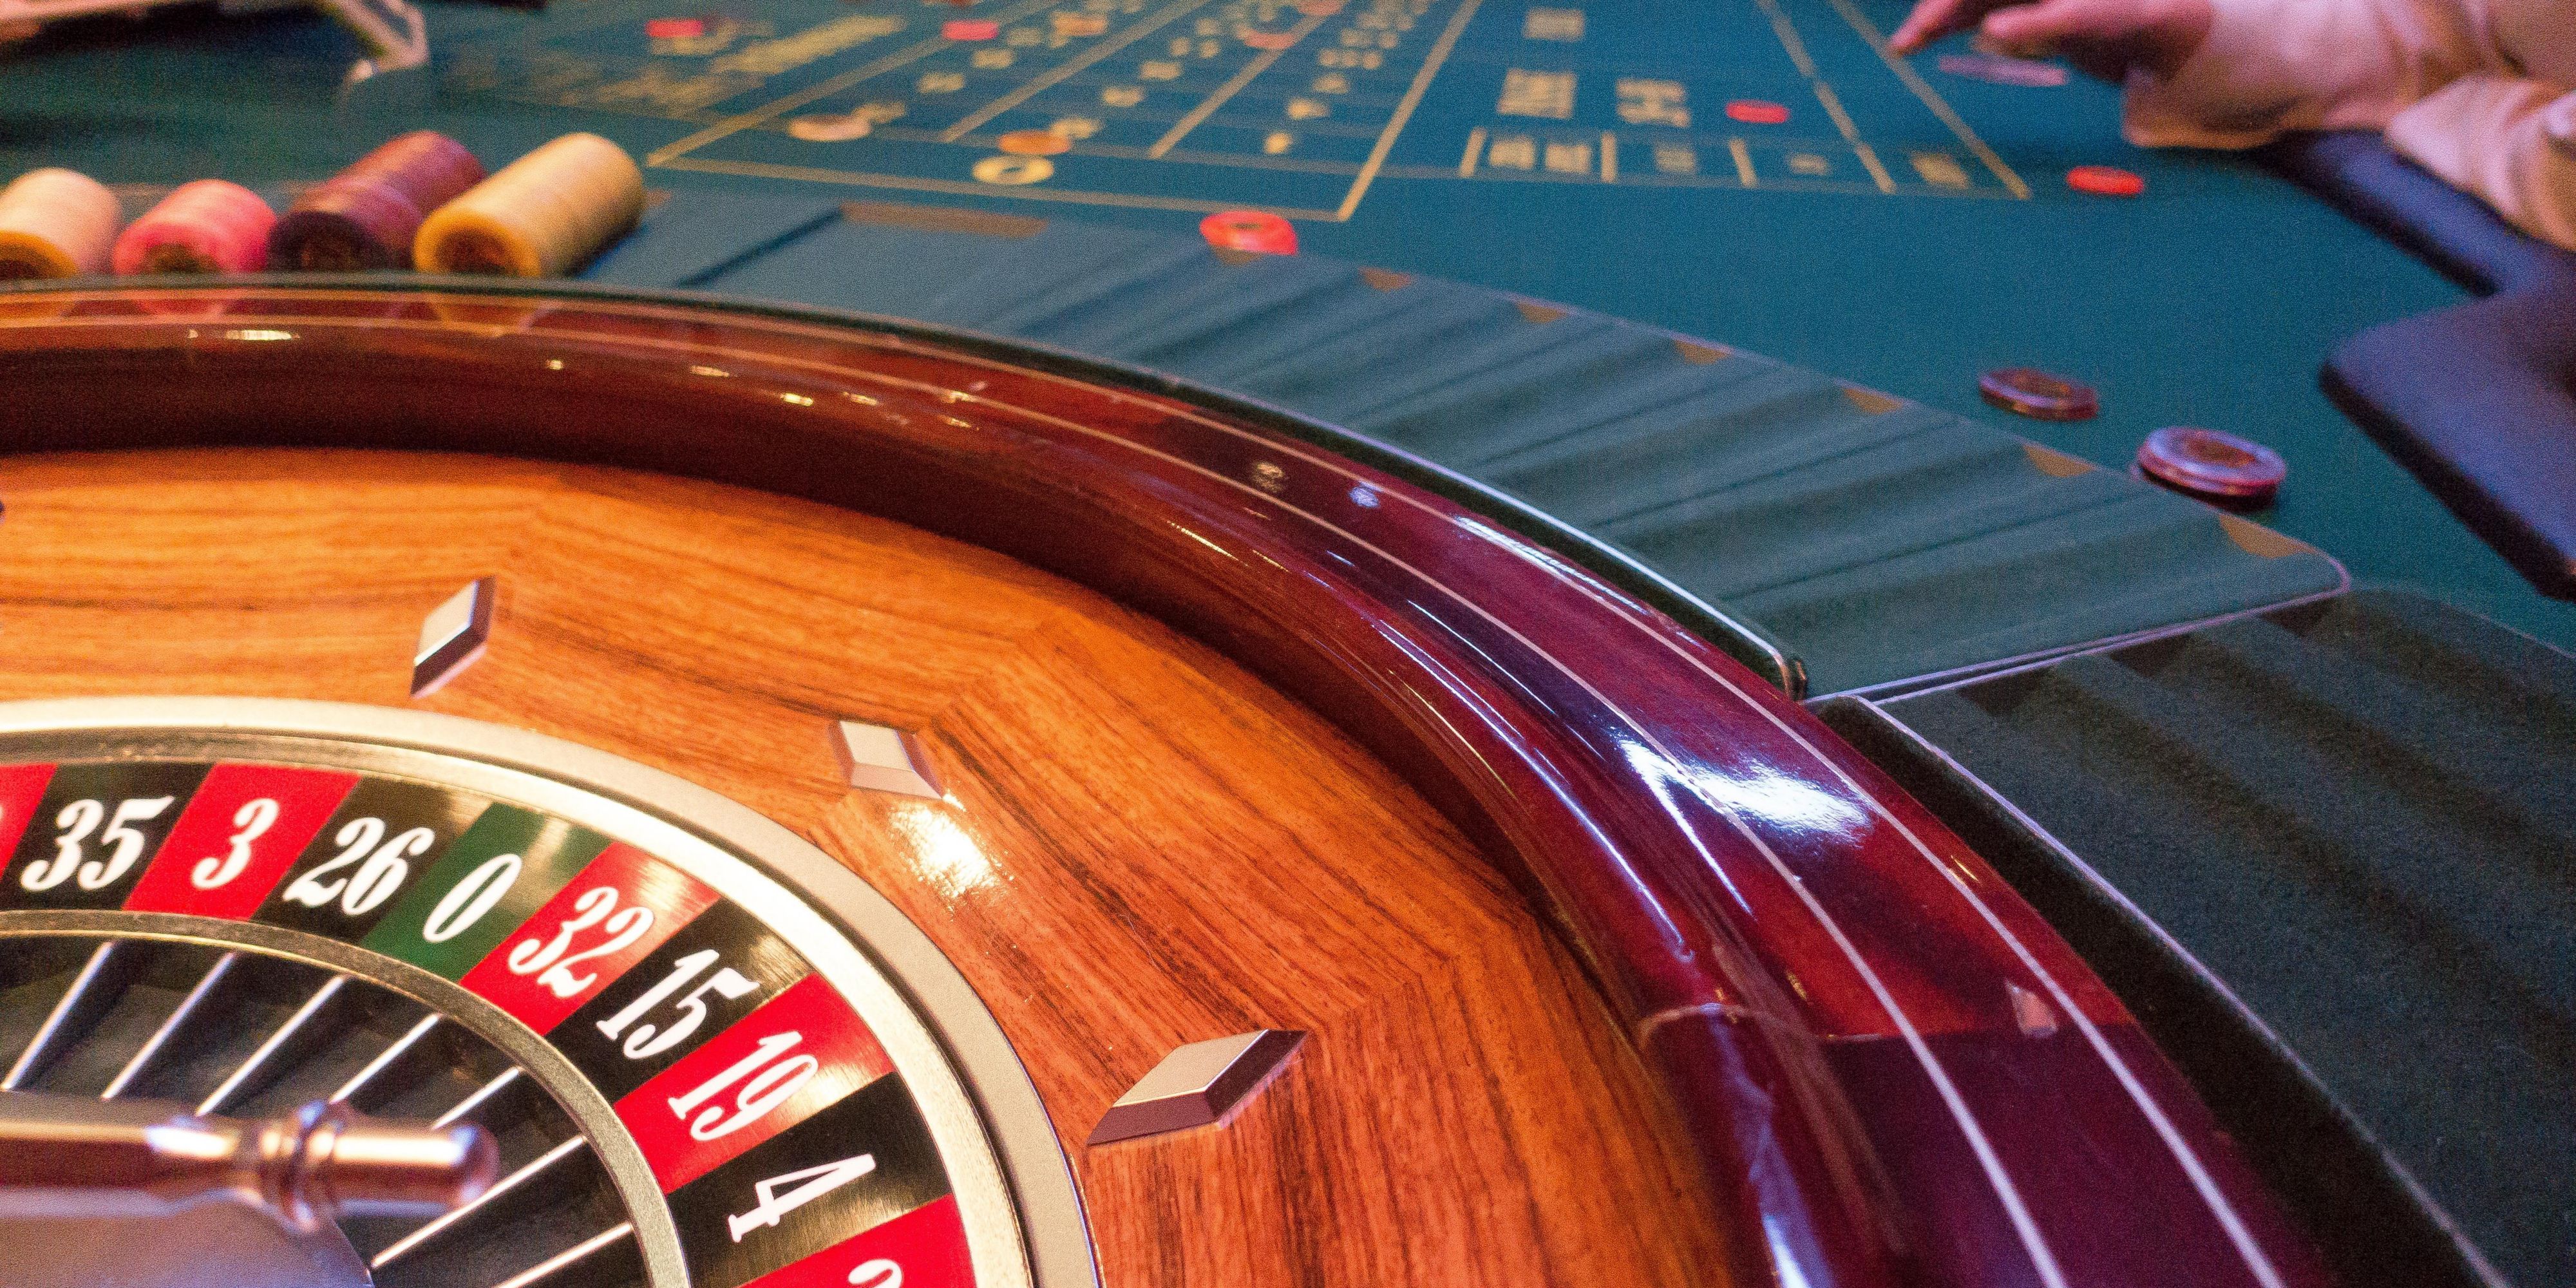 Try your luck with slot machines, cards, table games and much more at Durant's Choctaw Casino or book a spa day to rejuvenate!  Inquire about our shuttle services if you need a ride.